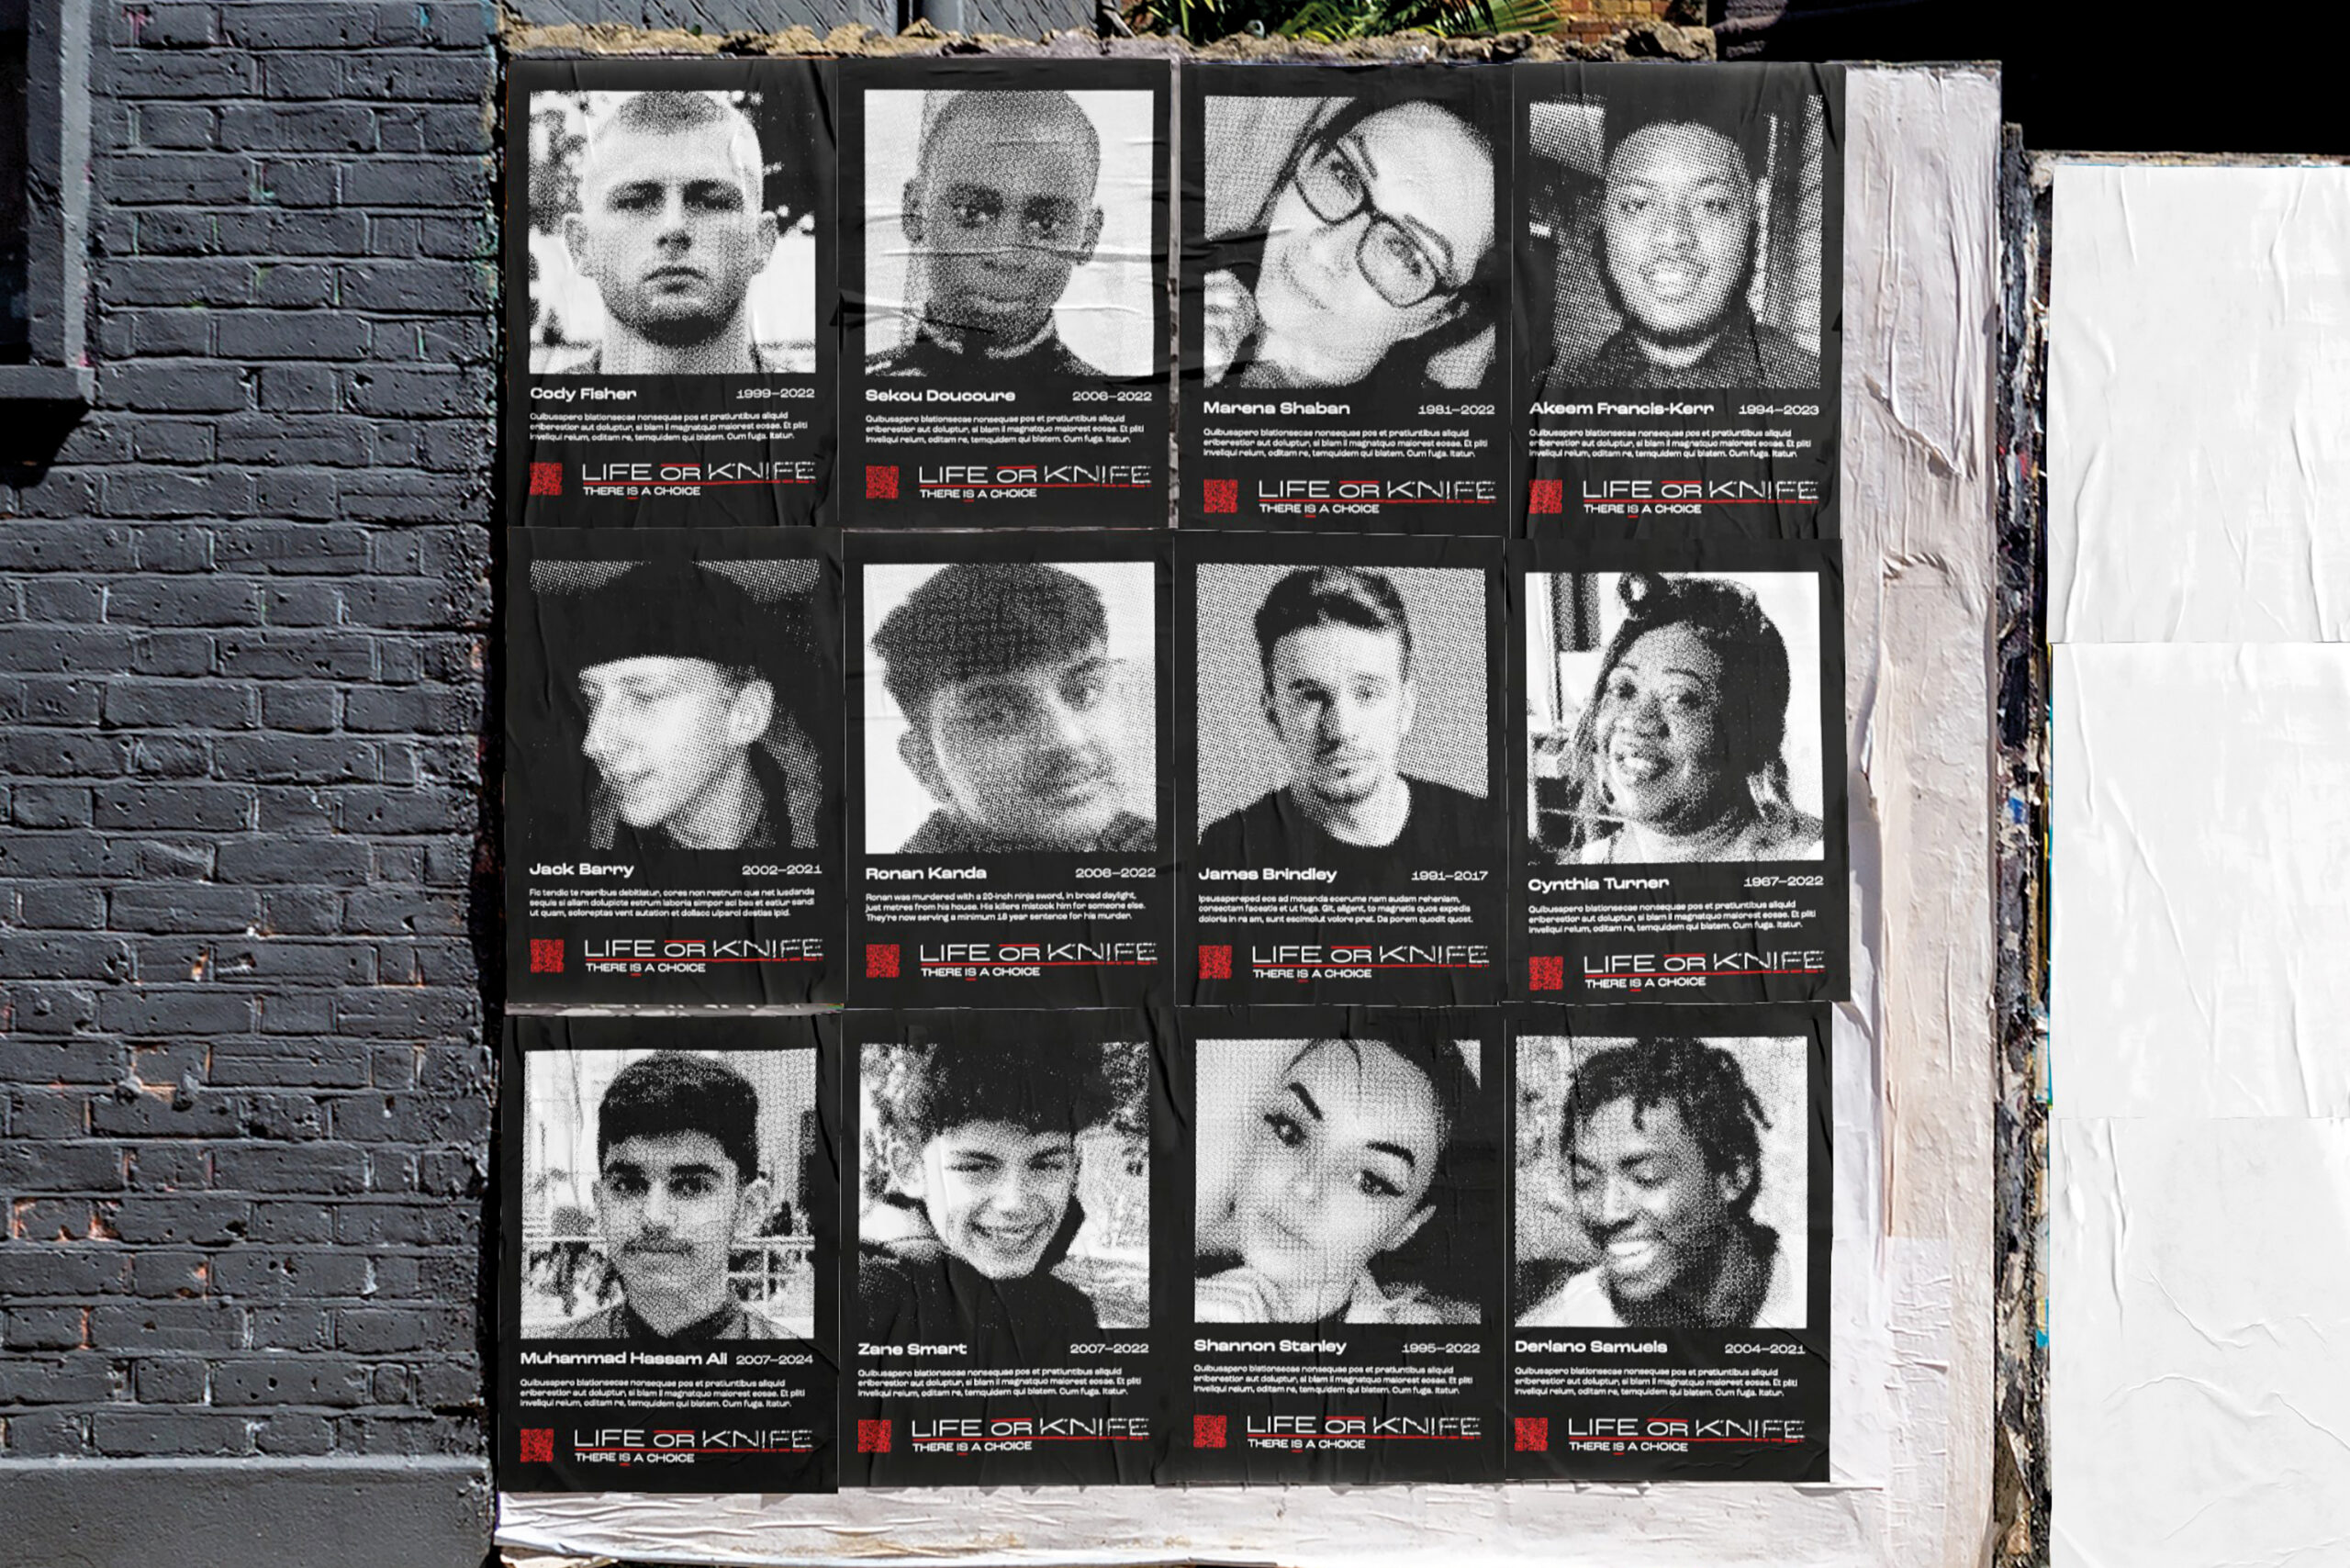 A block of 12 posters is wheatpasted to a hoarding on an urban street. Each poster shows a black and white image of a knife crime victim, with their name, age and story.